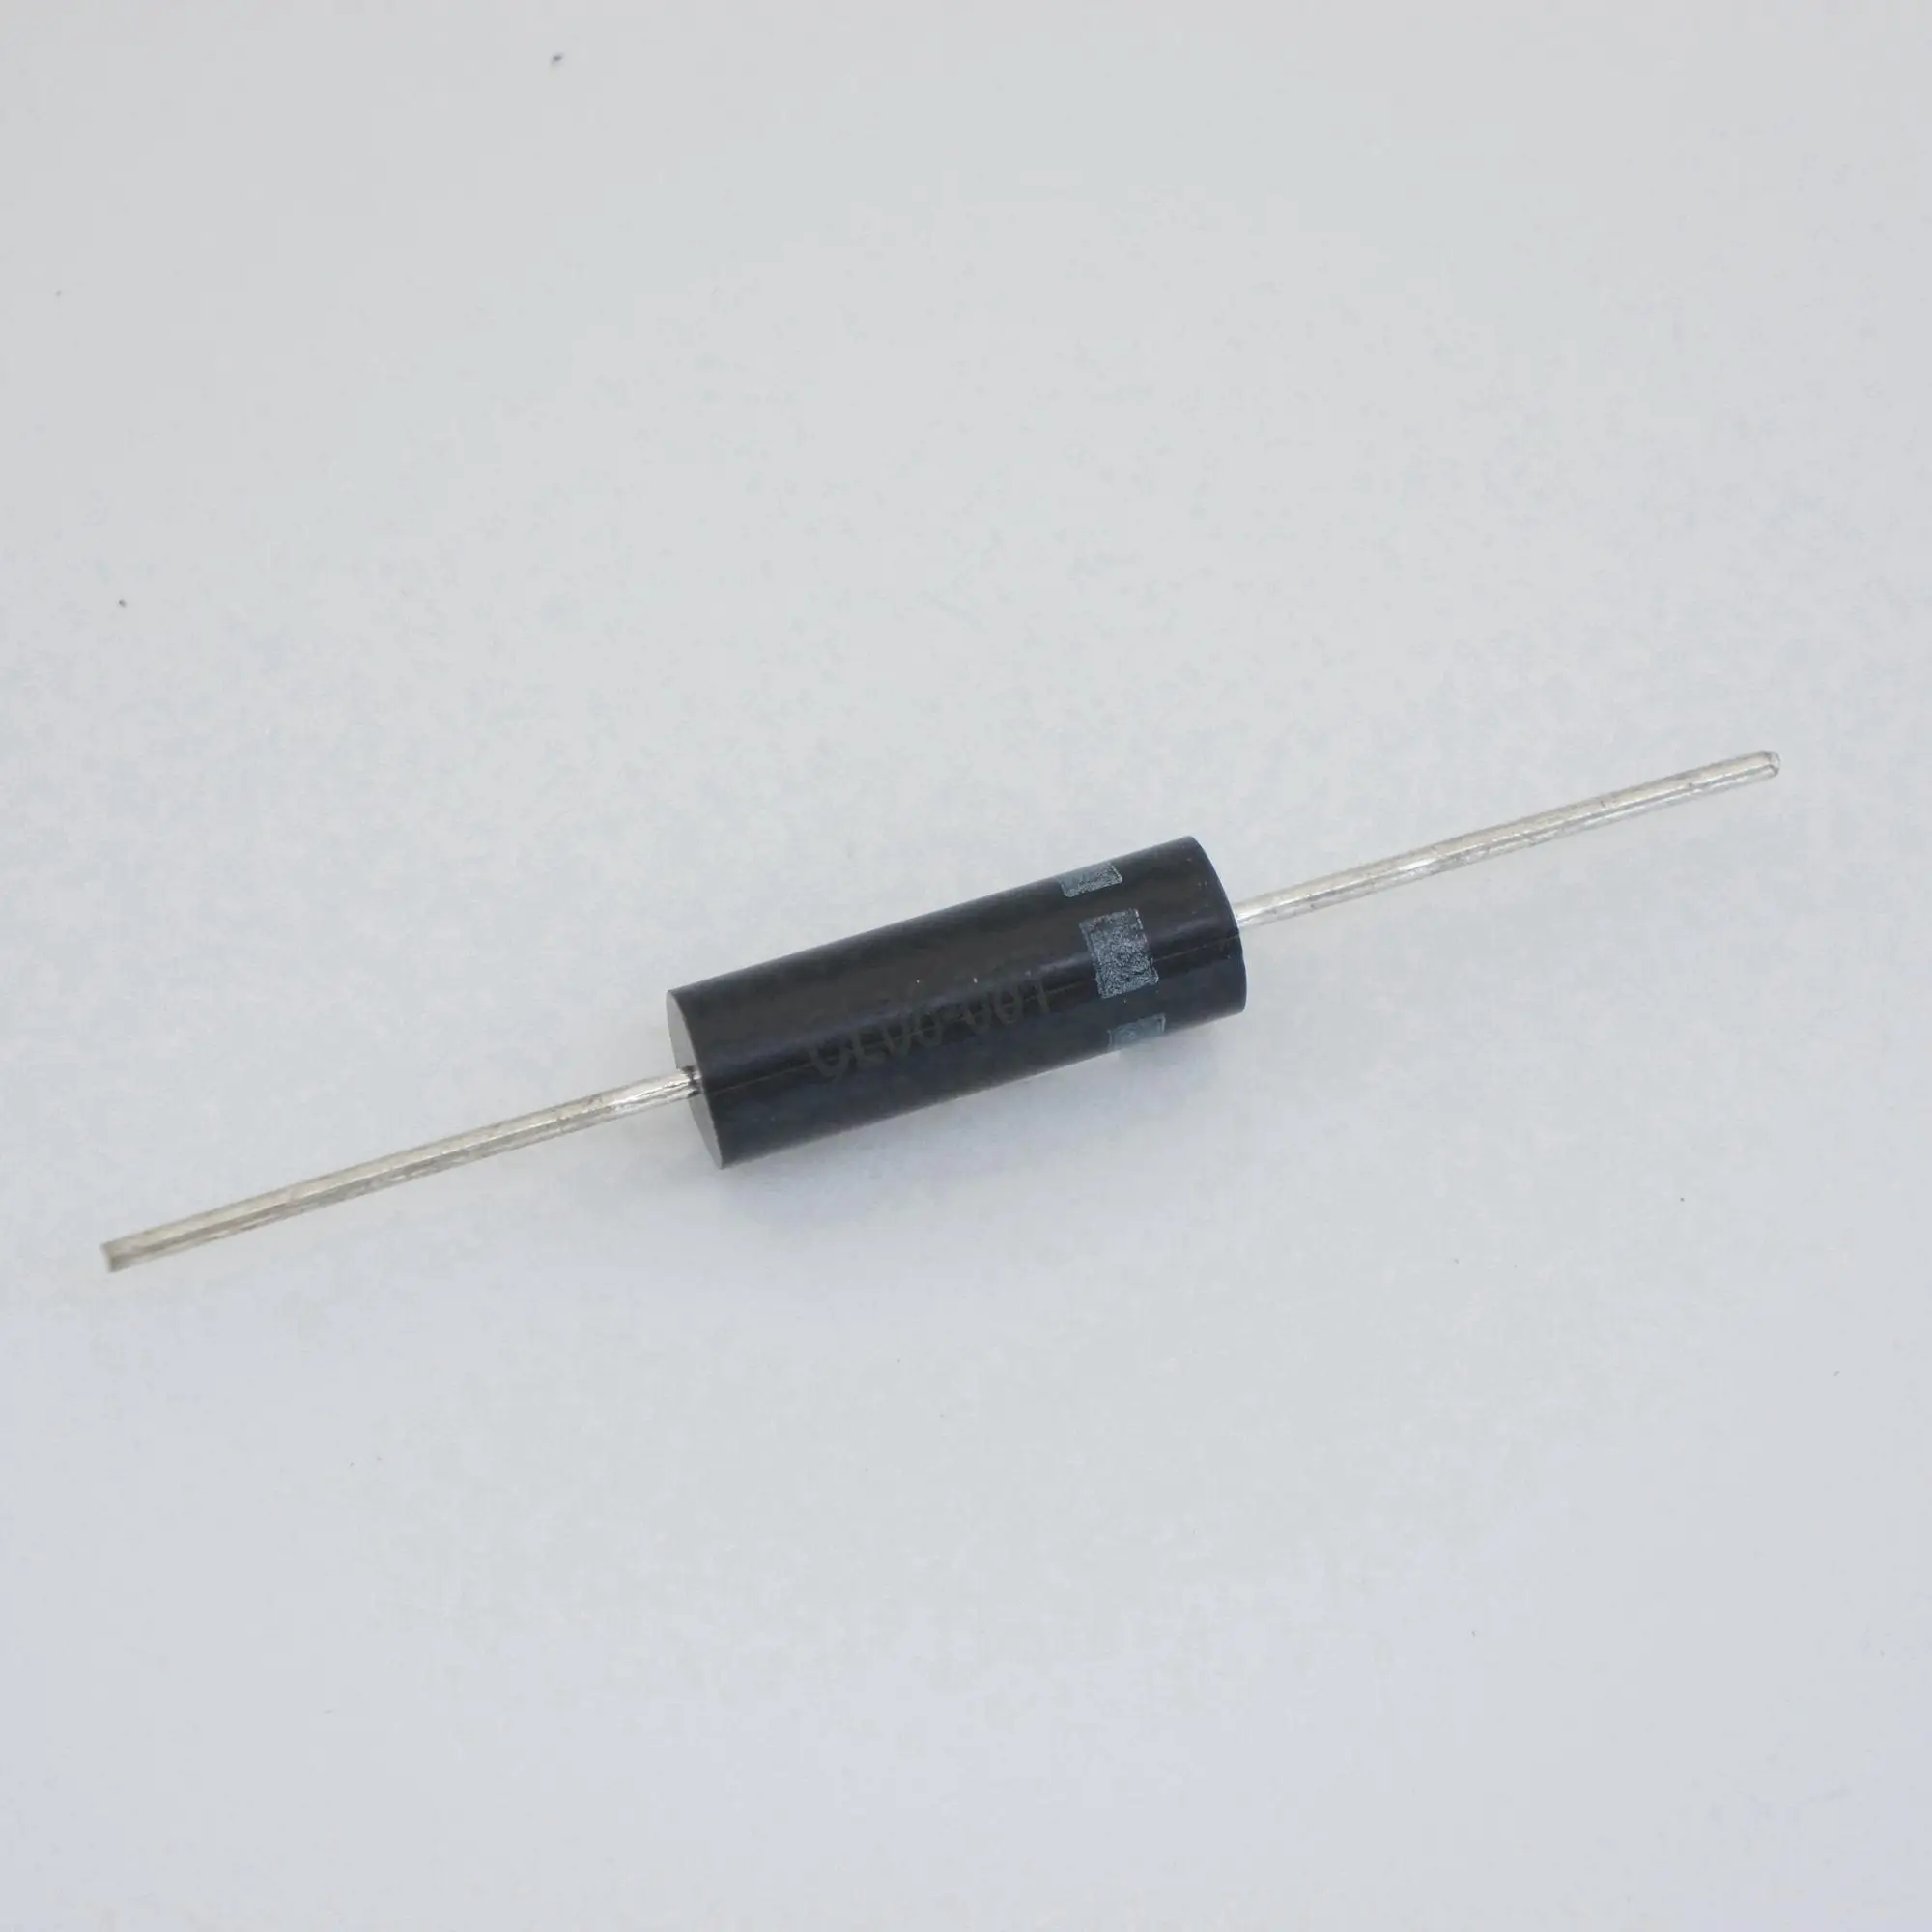 CL08-08T Low Price Top Quality high frequency rectifier diode,high voltage diode